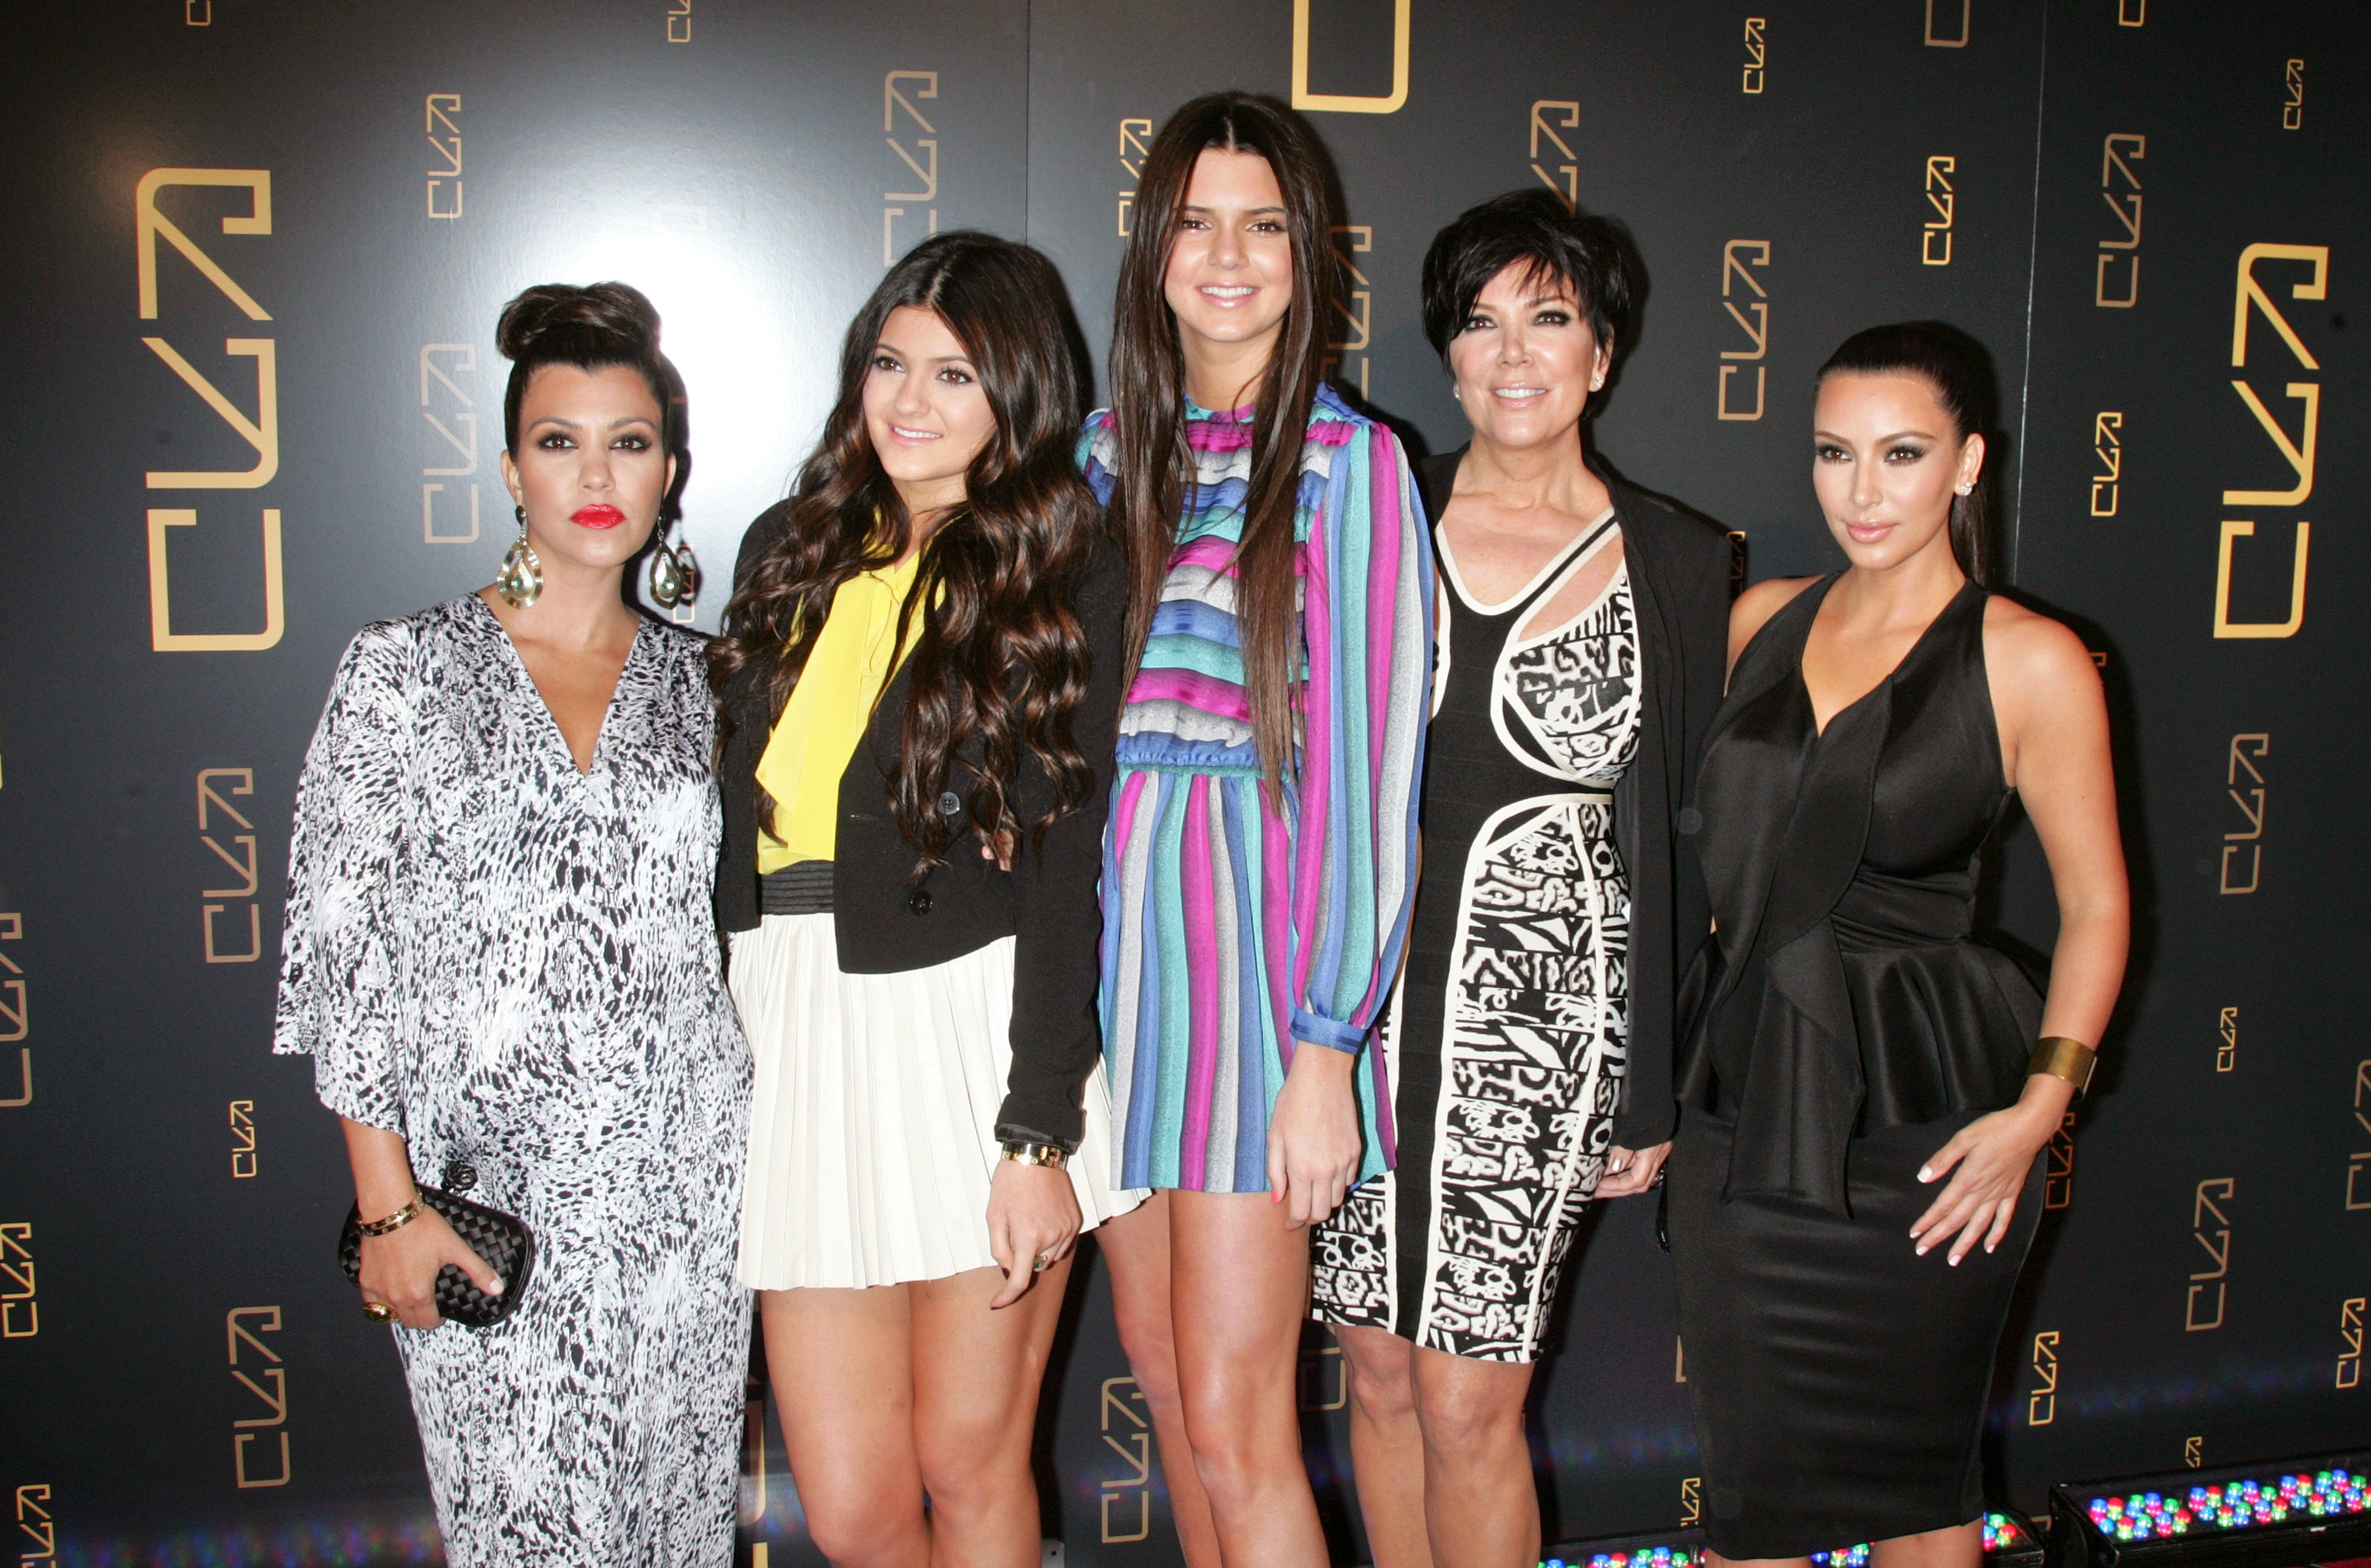 Kourtney, Kim, Kris, and Kylie and Kendall Jenner at a media event